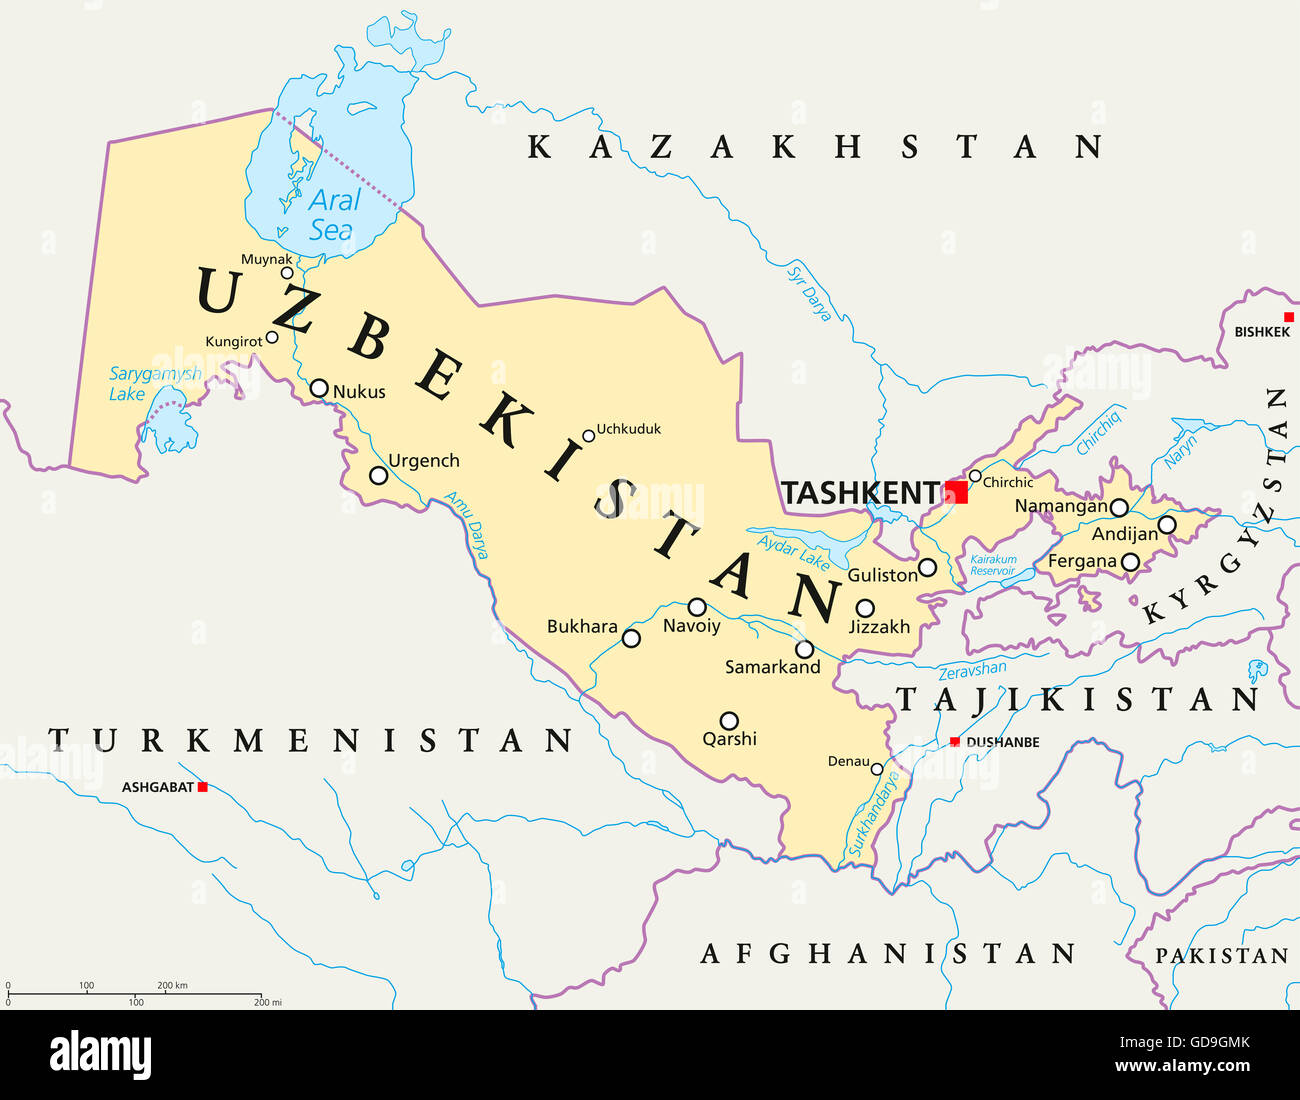 Uzbekistan political map with capital Tashkent, national borders, important cities, rivers and lakes. Country in Central Asia. Stock Photo